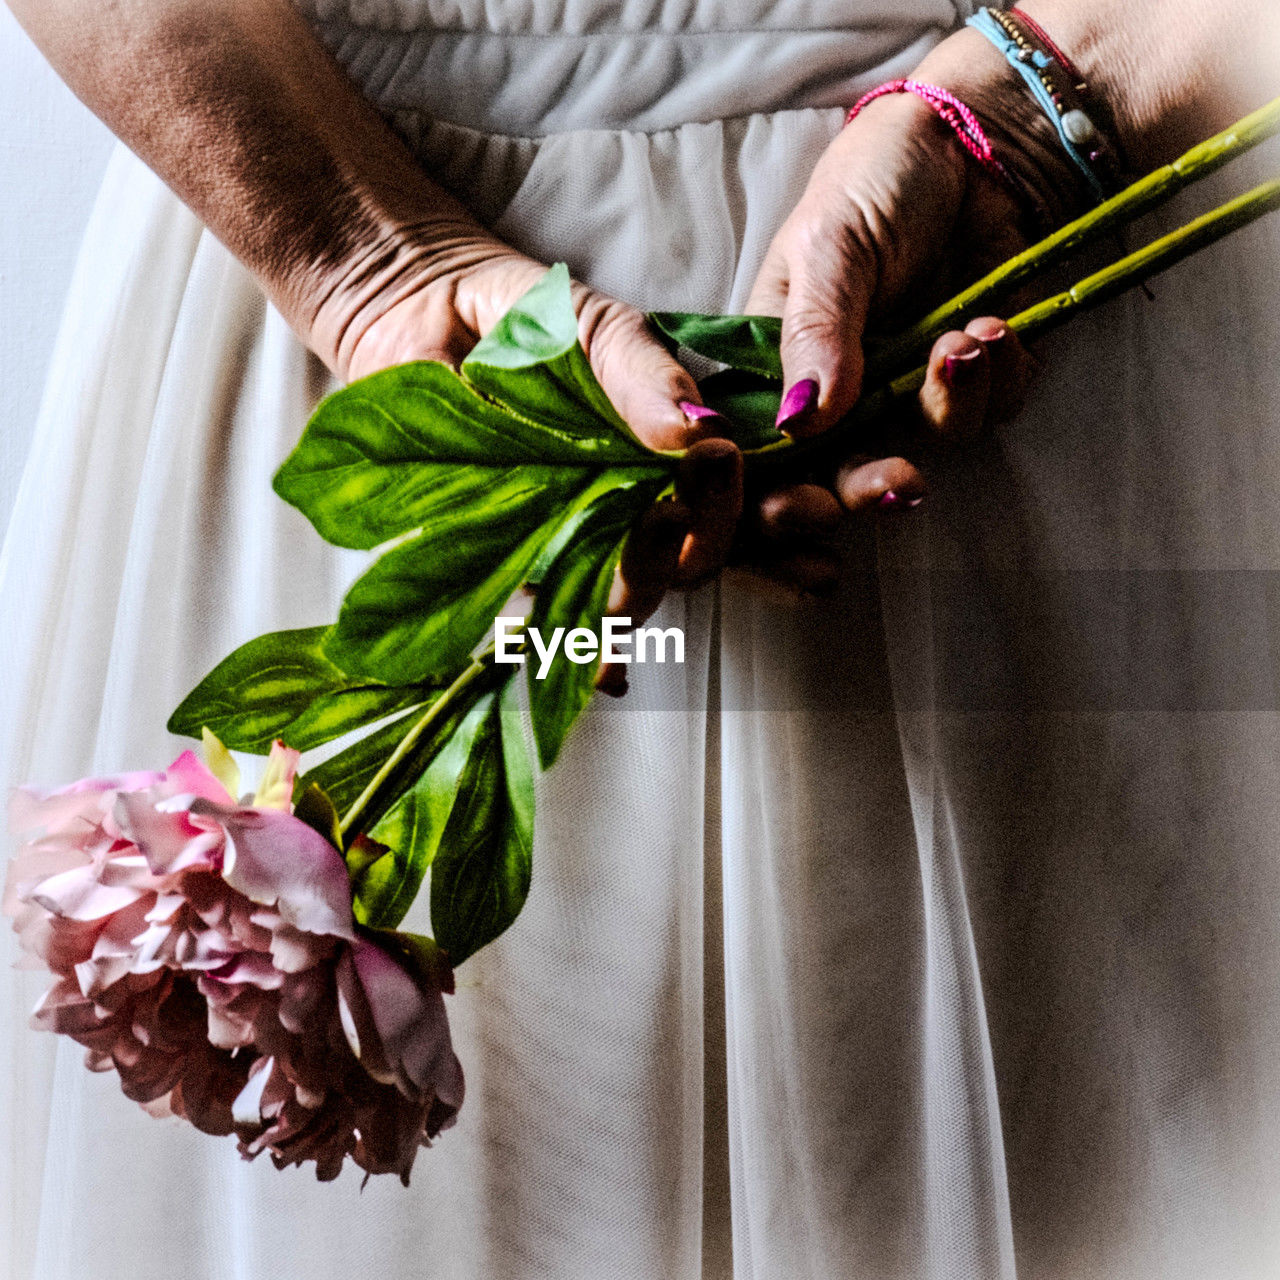 adult, flower, one person, spring, plant, hand, bride, dress, indoors, bouquet, clothing, pink, midsection, holding, flowering plant, wedding dress, women, close-up, nature, floristry, plant part, green, flower arrangement, leaf, lifestyles, men, textile, ceremony, fashion, fashion accessory, freshness